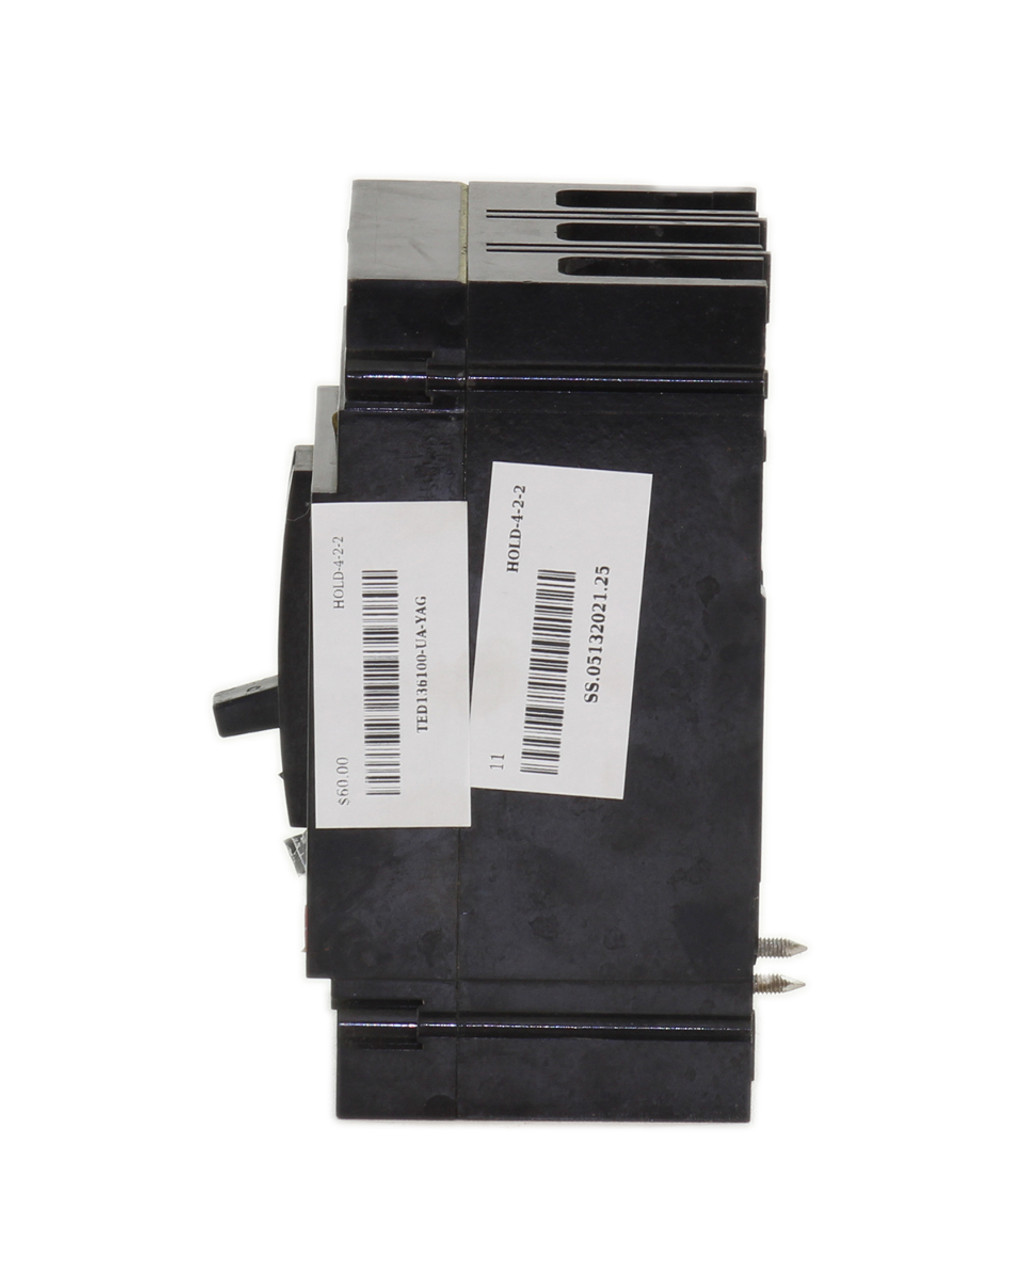 General Electric TED136100 Breaker 100A 600V 3P